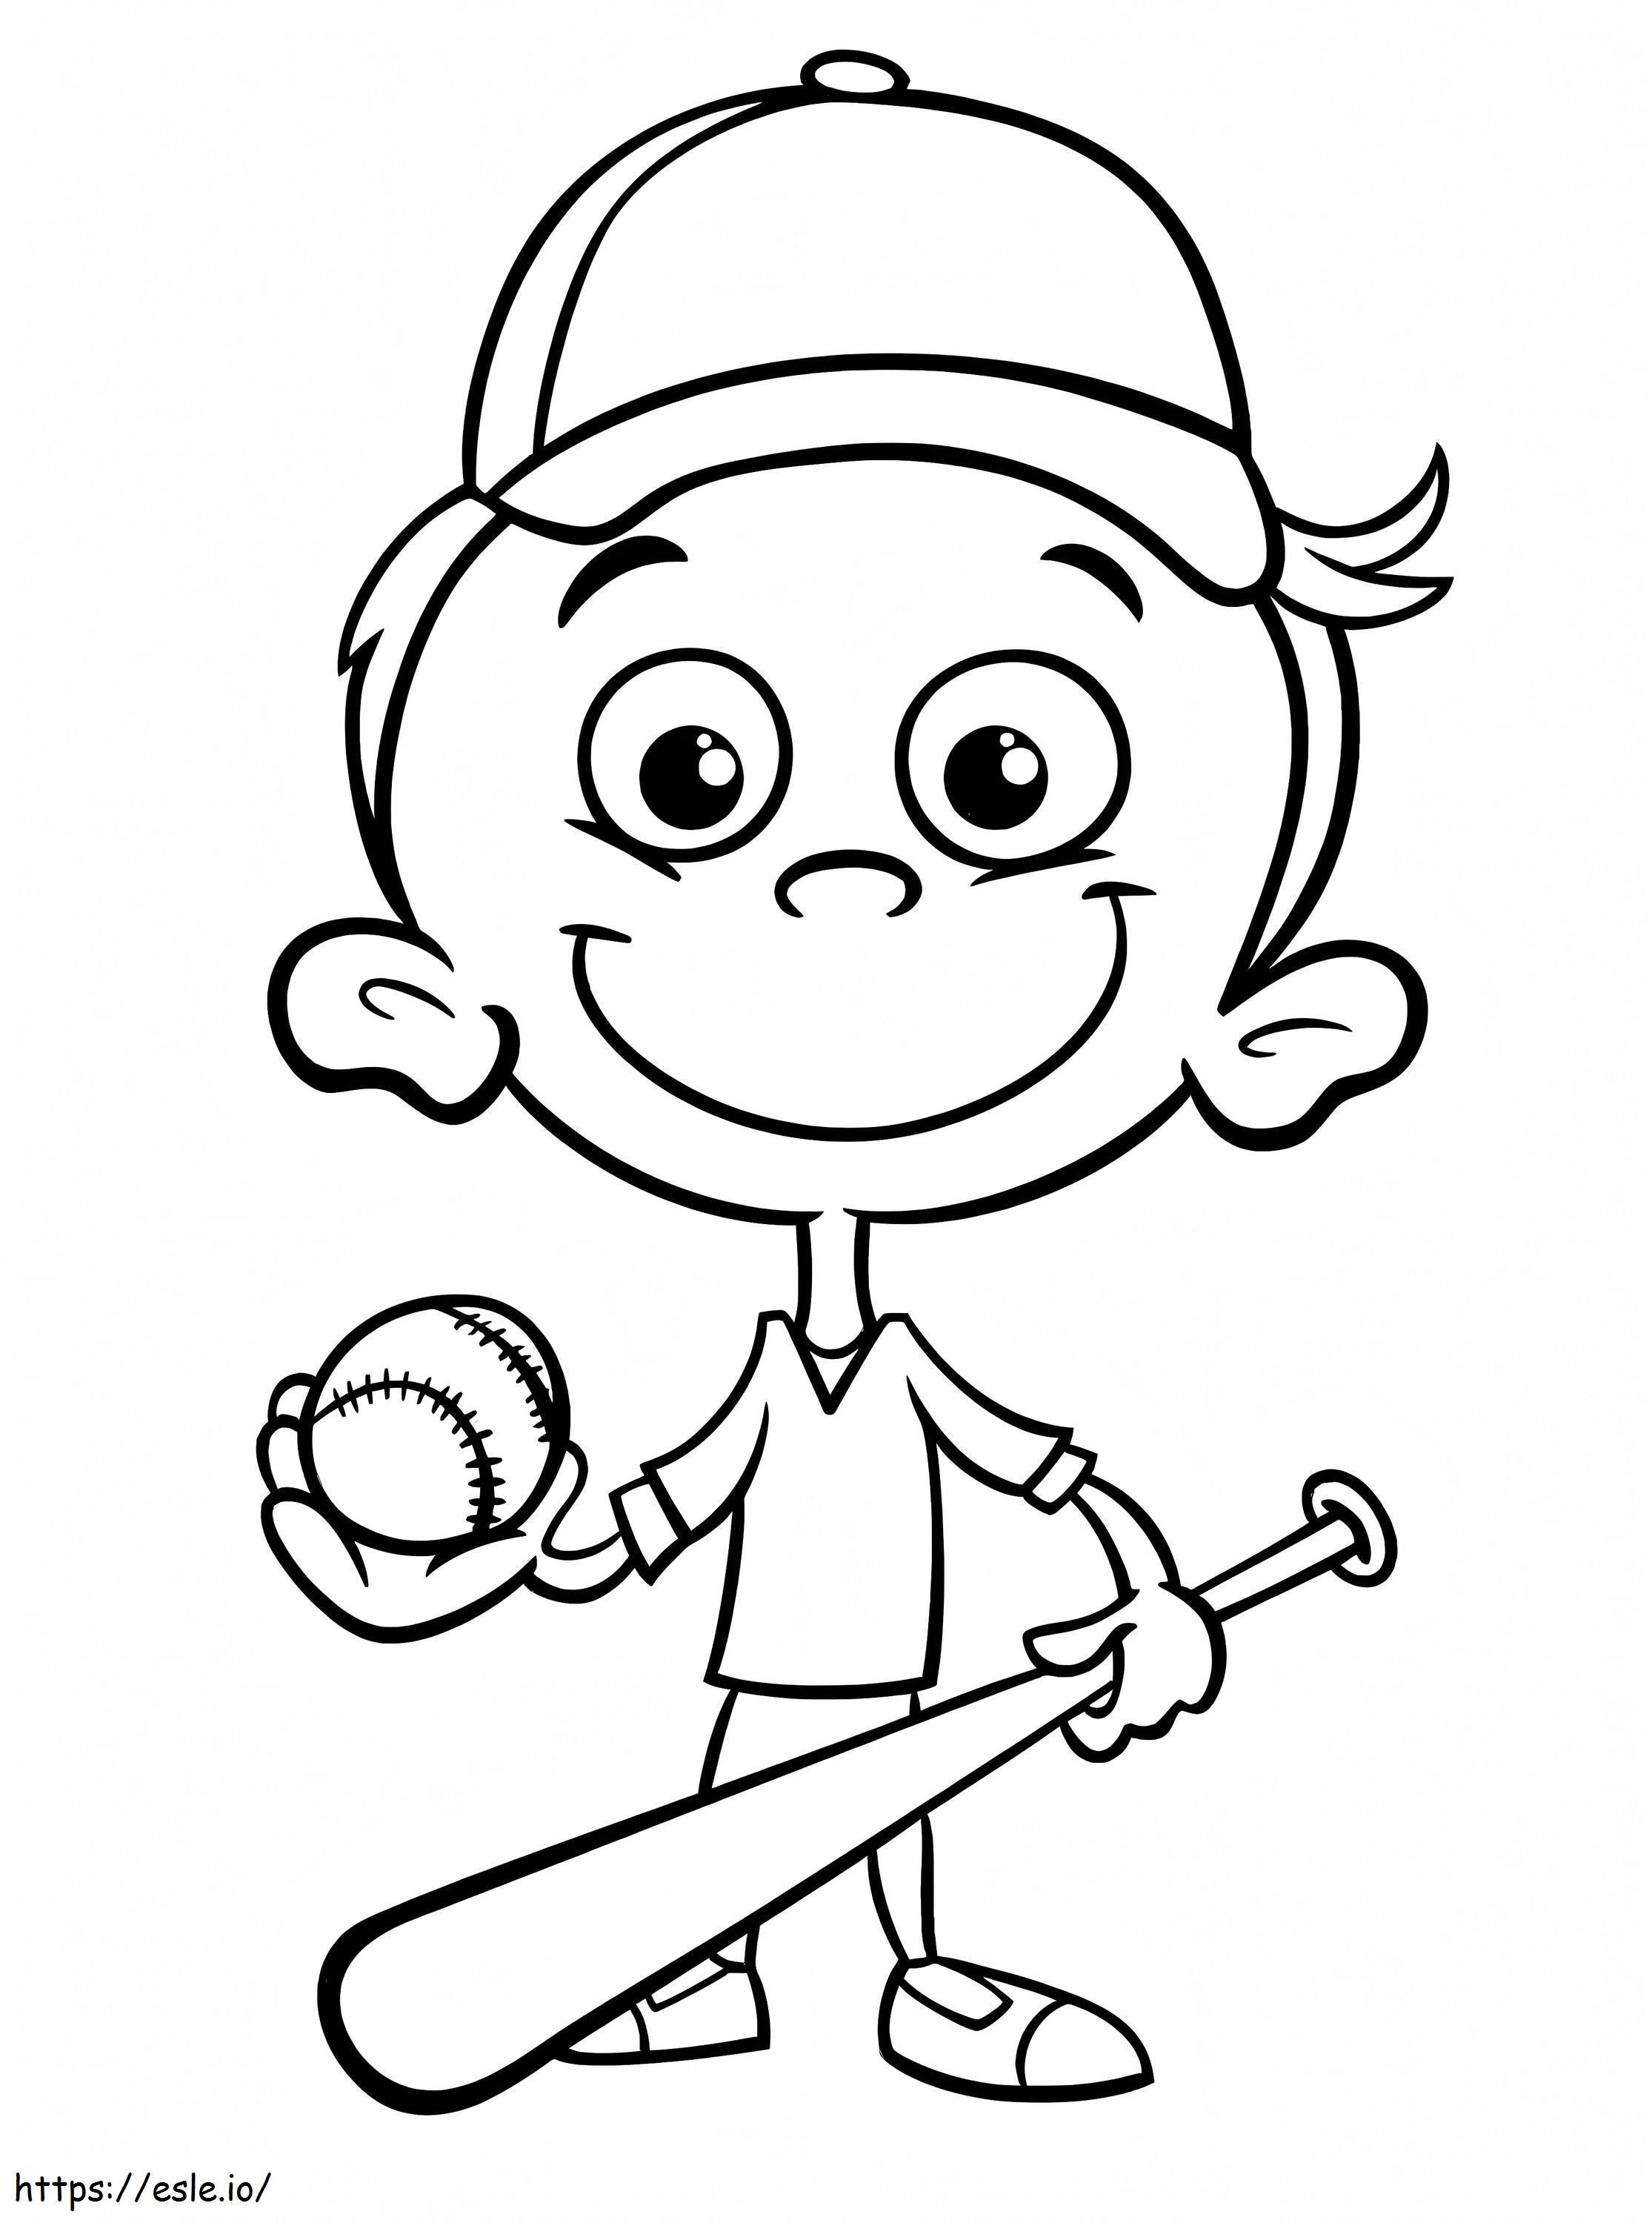 Little Baseball Player coloring page